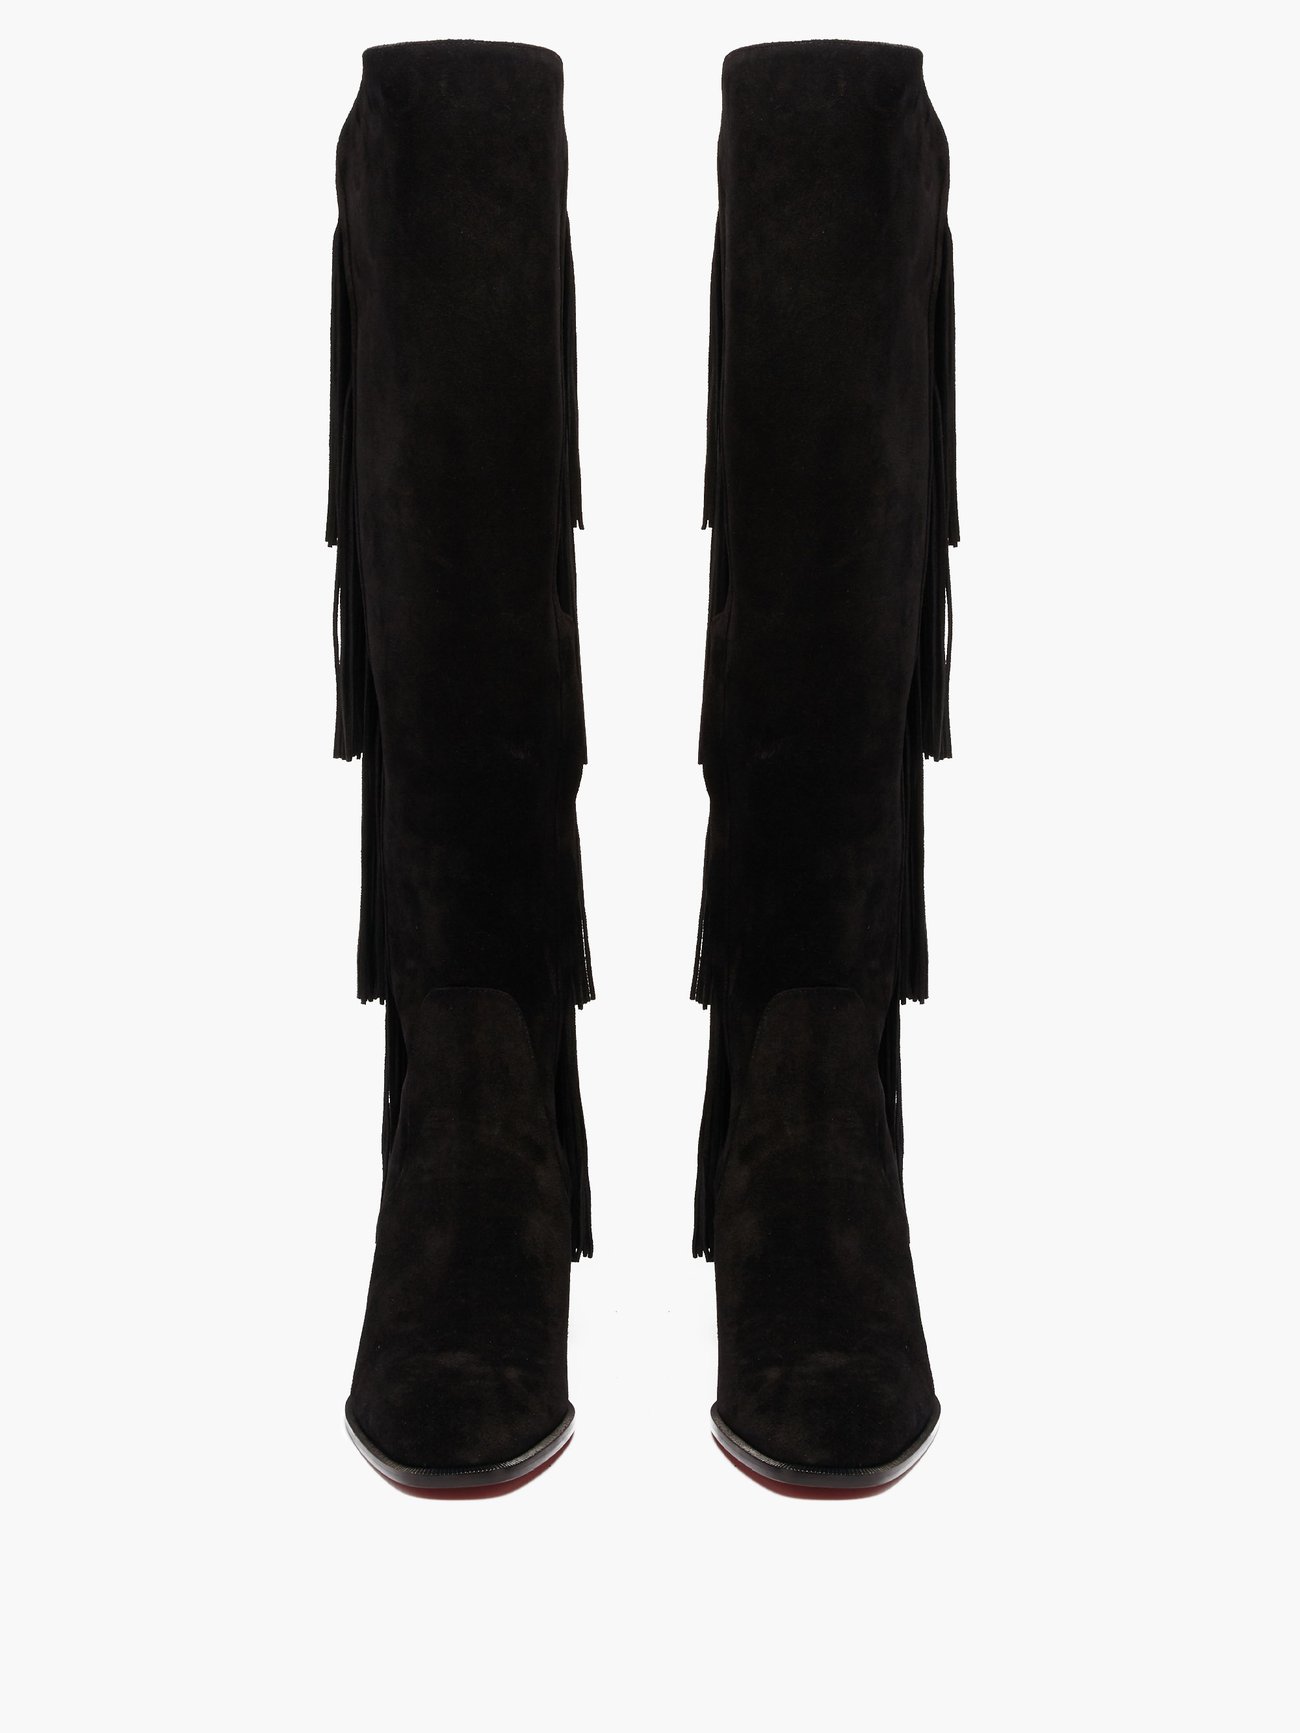 Christian Louboutin BOOT LION 55 Suede Fringe Over Knee High Boots